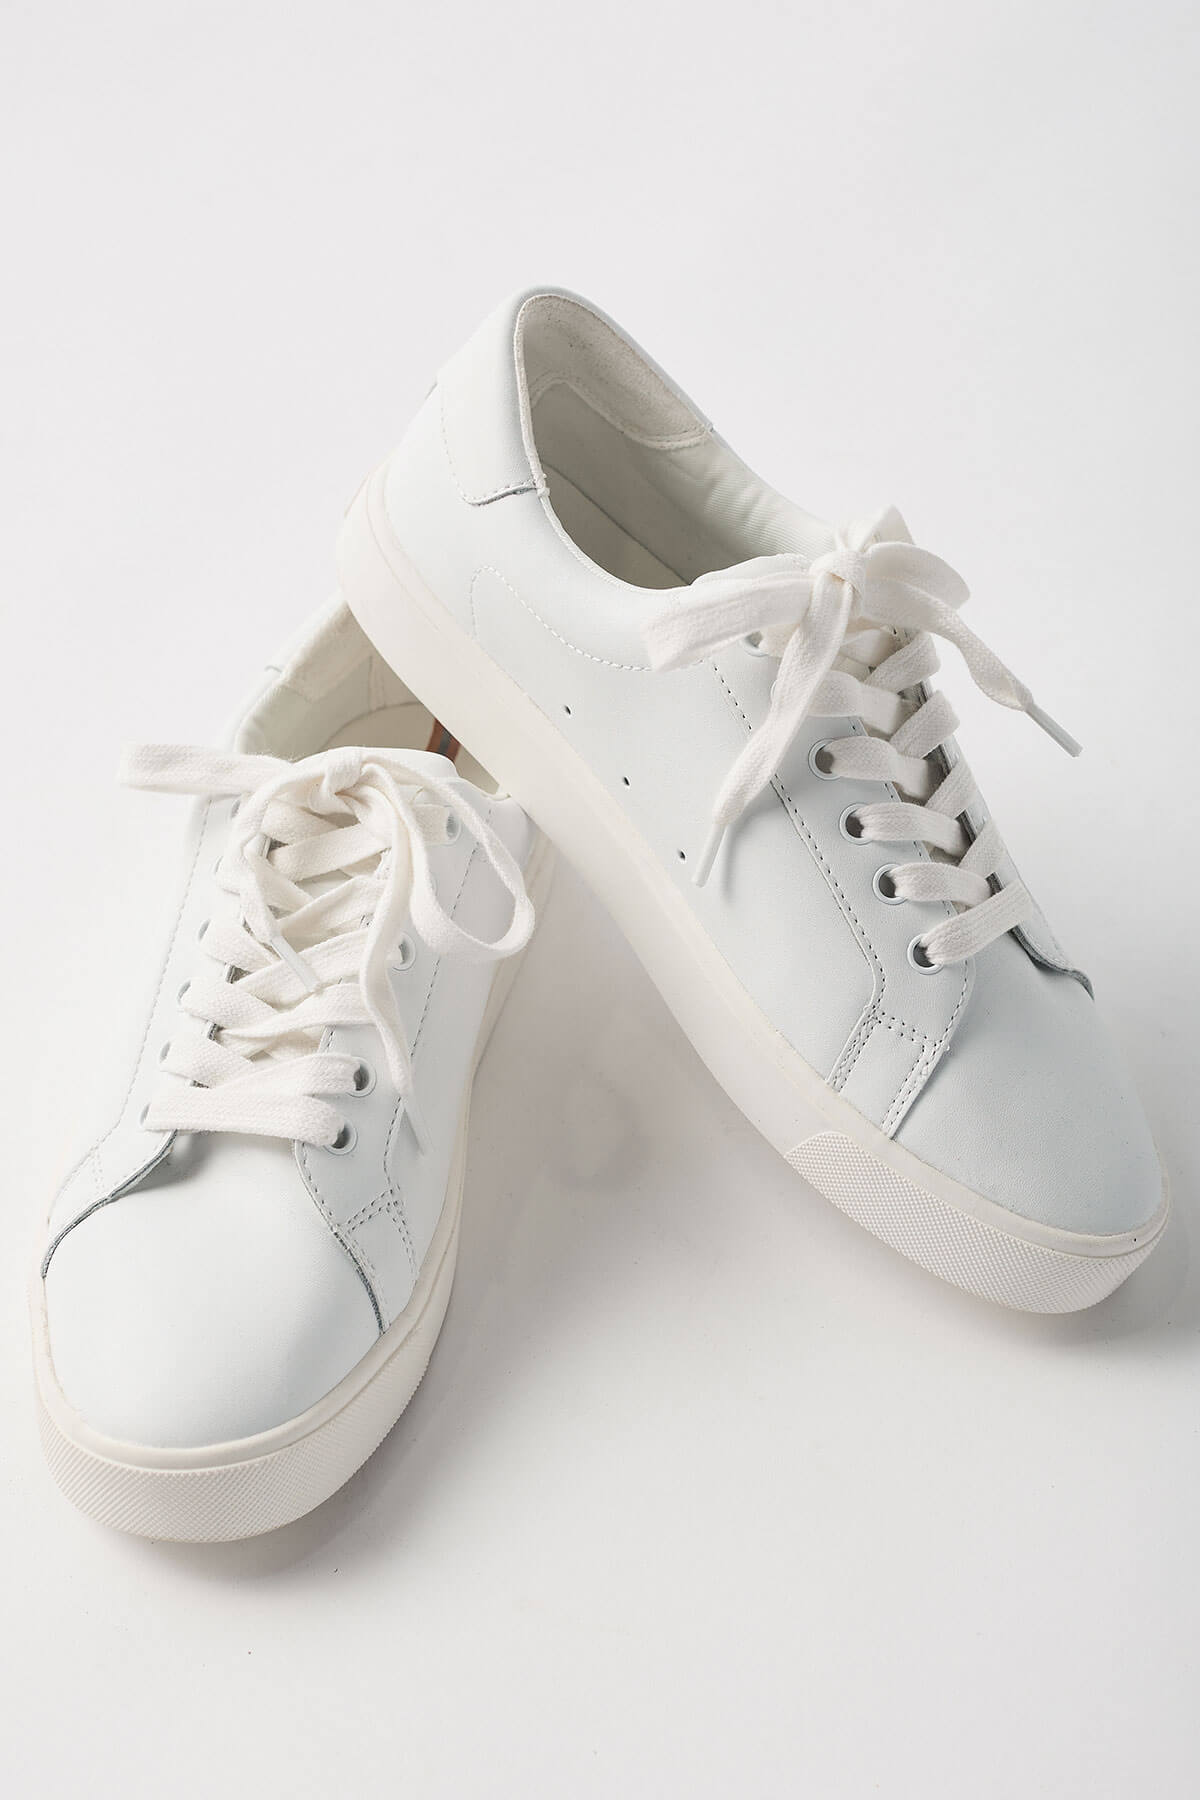 Sam Edelman Ethyl Lace Up Leather Sneakers